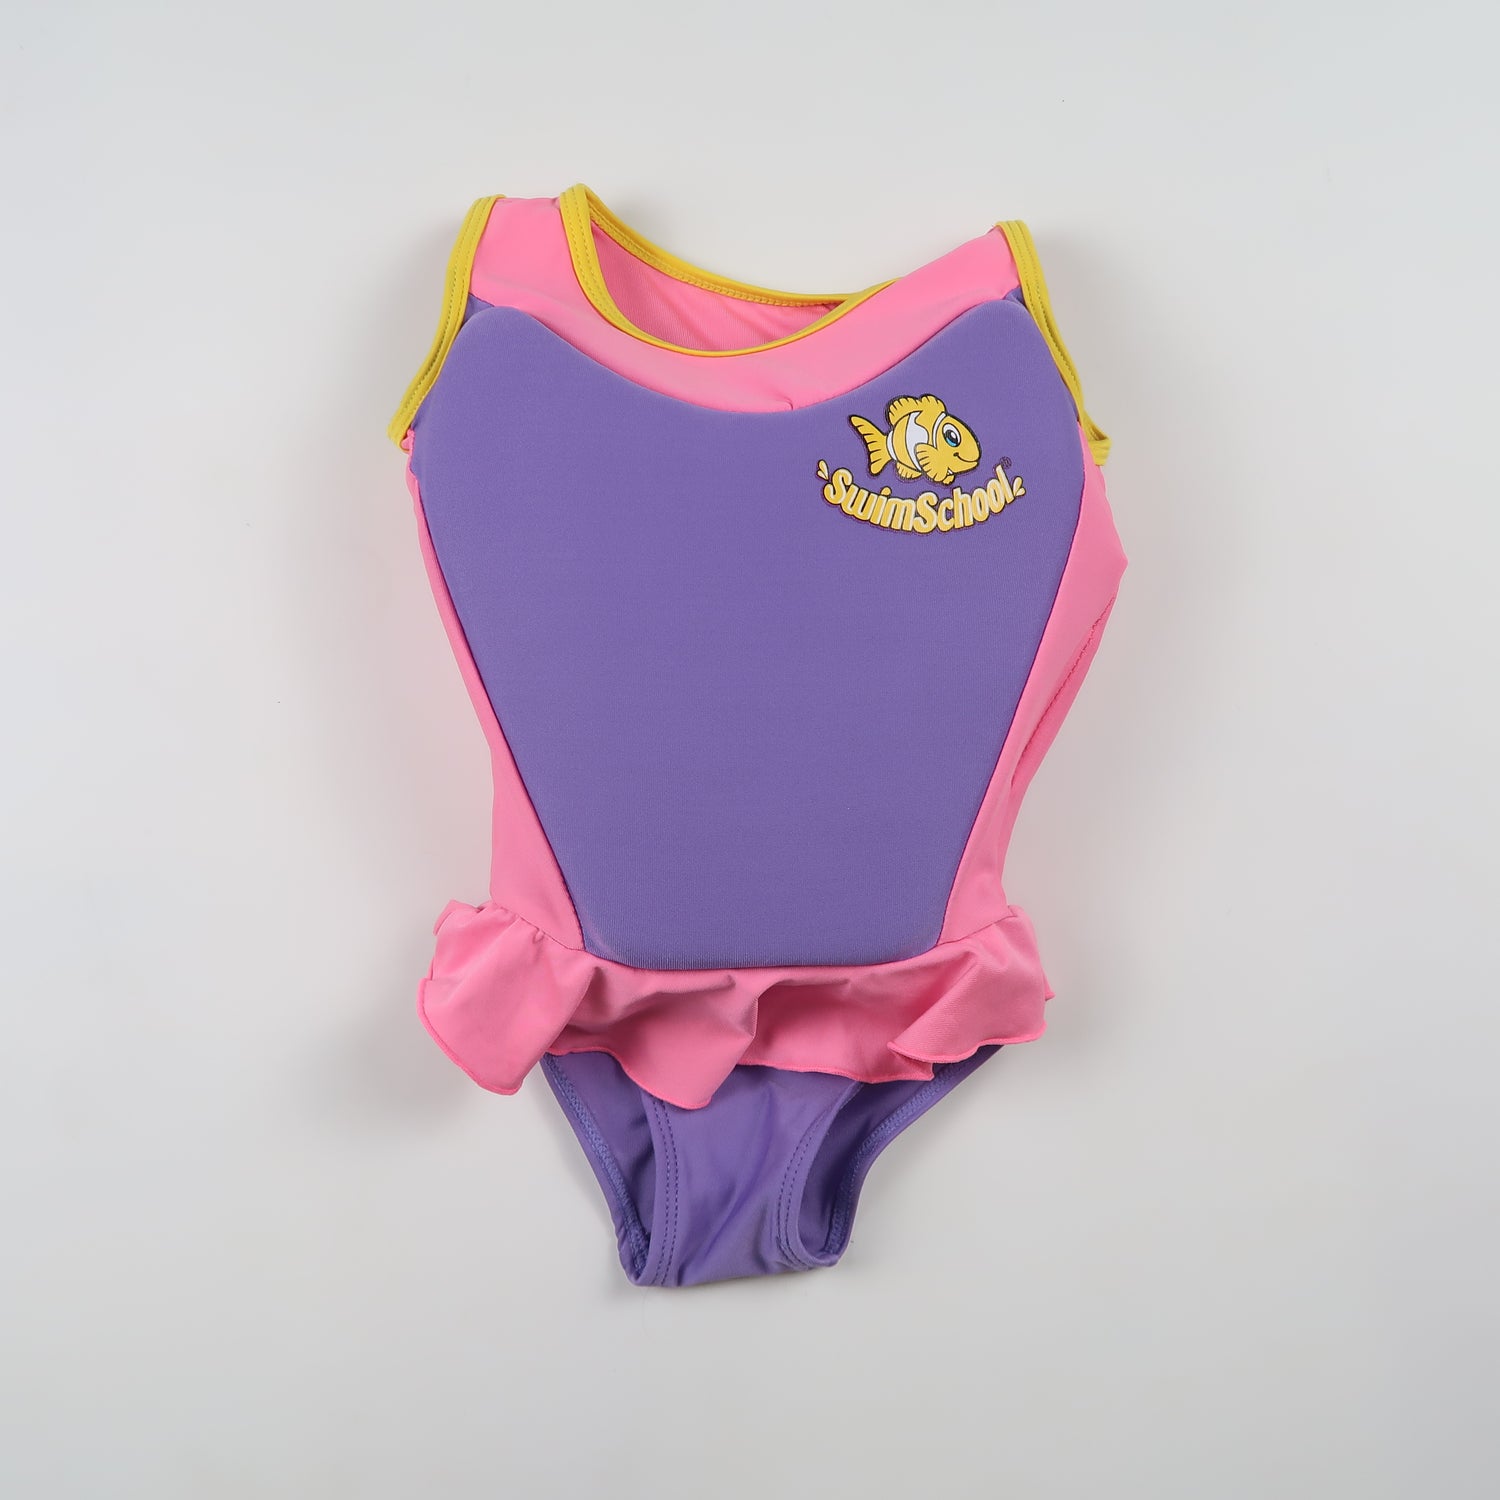 SwimSchool - Swimsuit with Built-In Floating Vest (20-33 lbs)